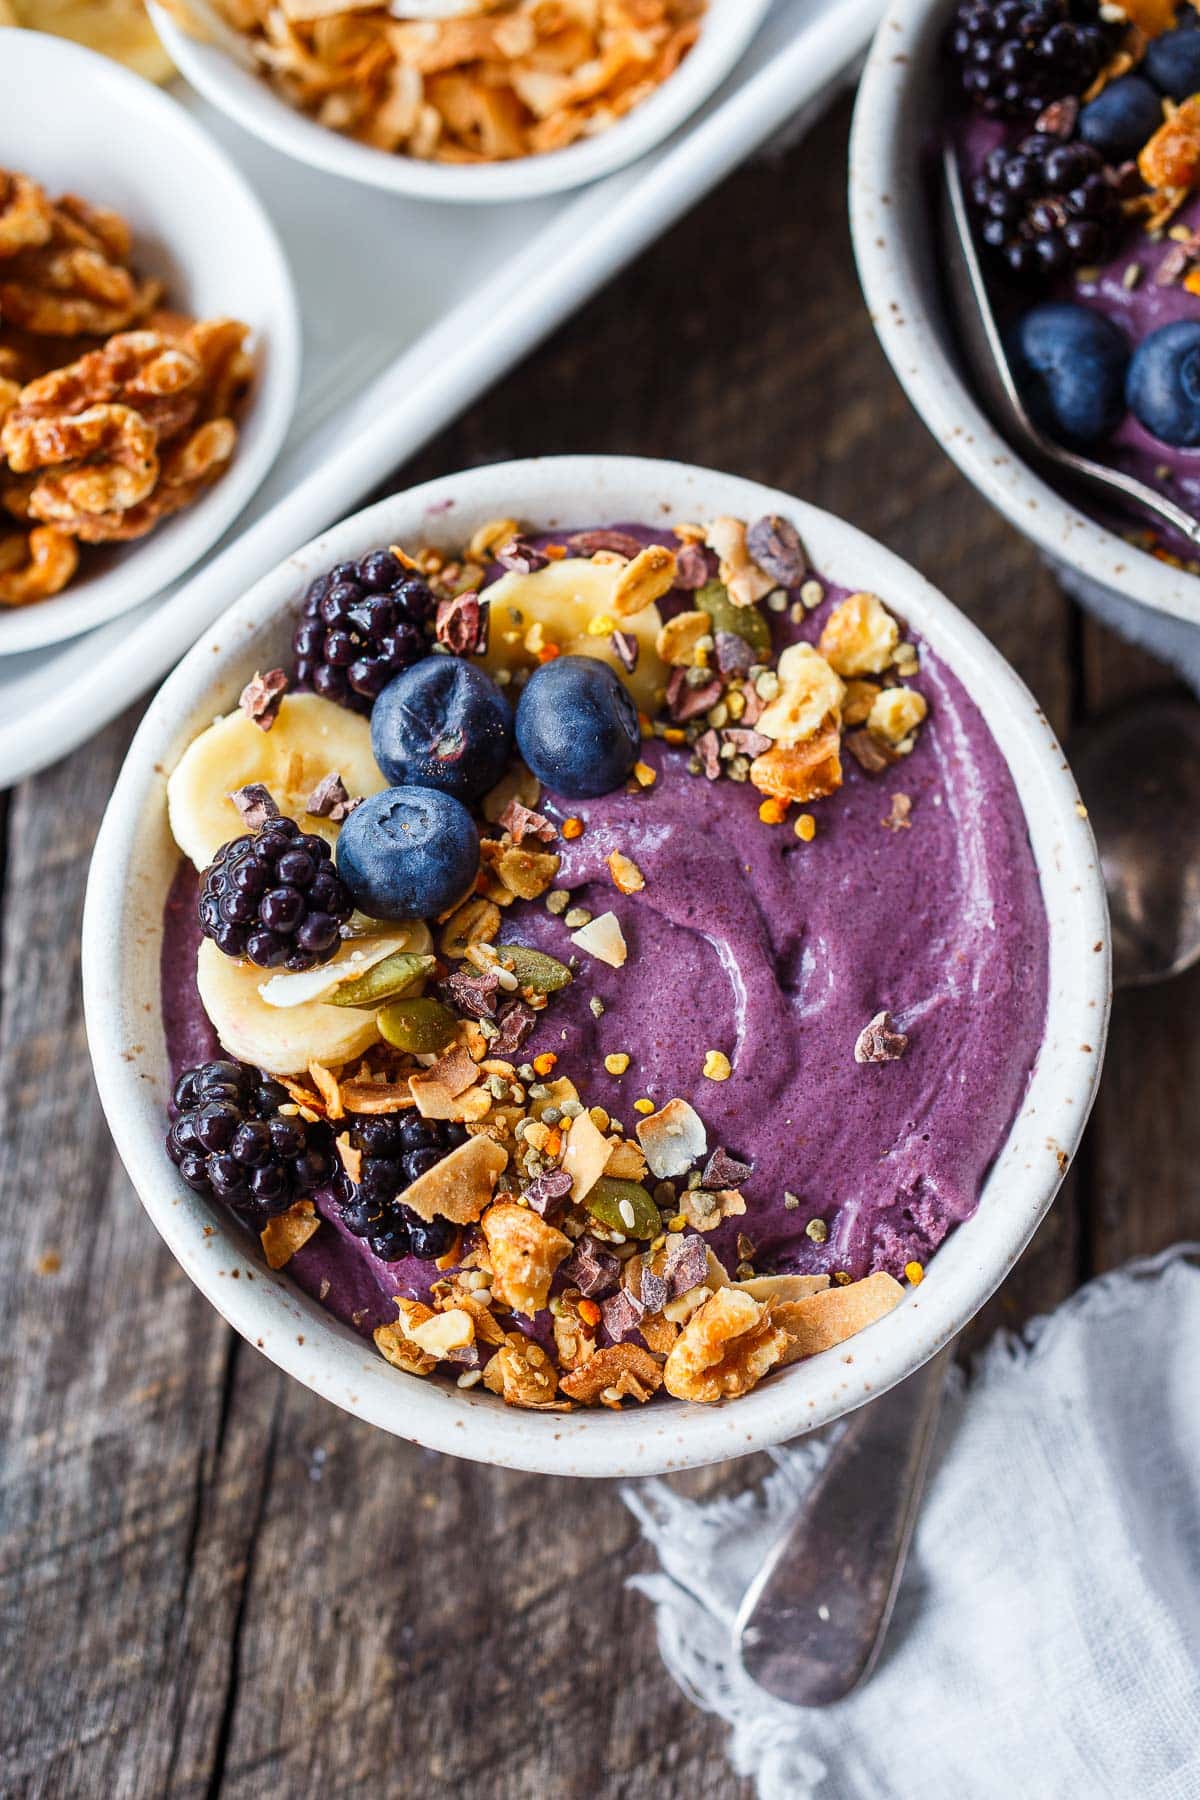 acai bowl topped with blueberries, blackberries, sliced bananas, granola, toasted coconut, and bee pollen.